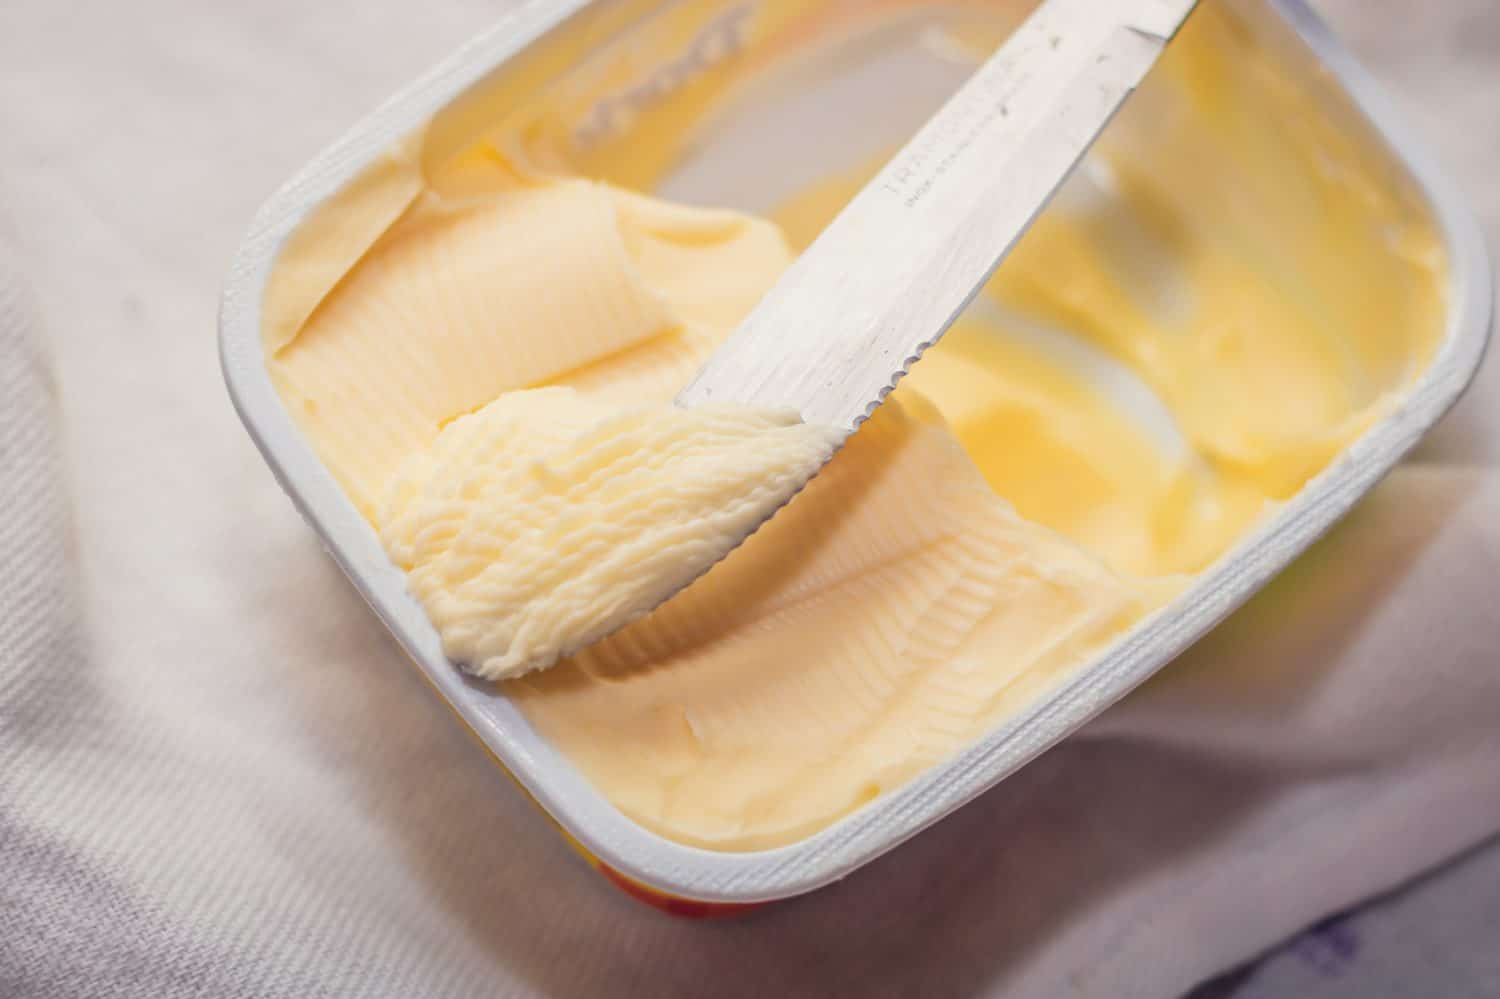 taking margarine from the jar with the knife